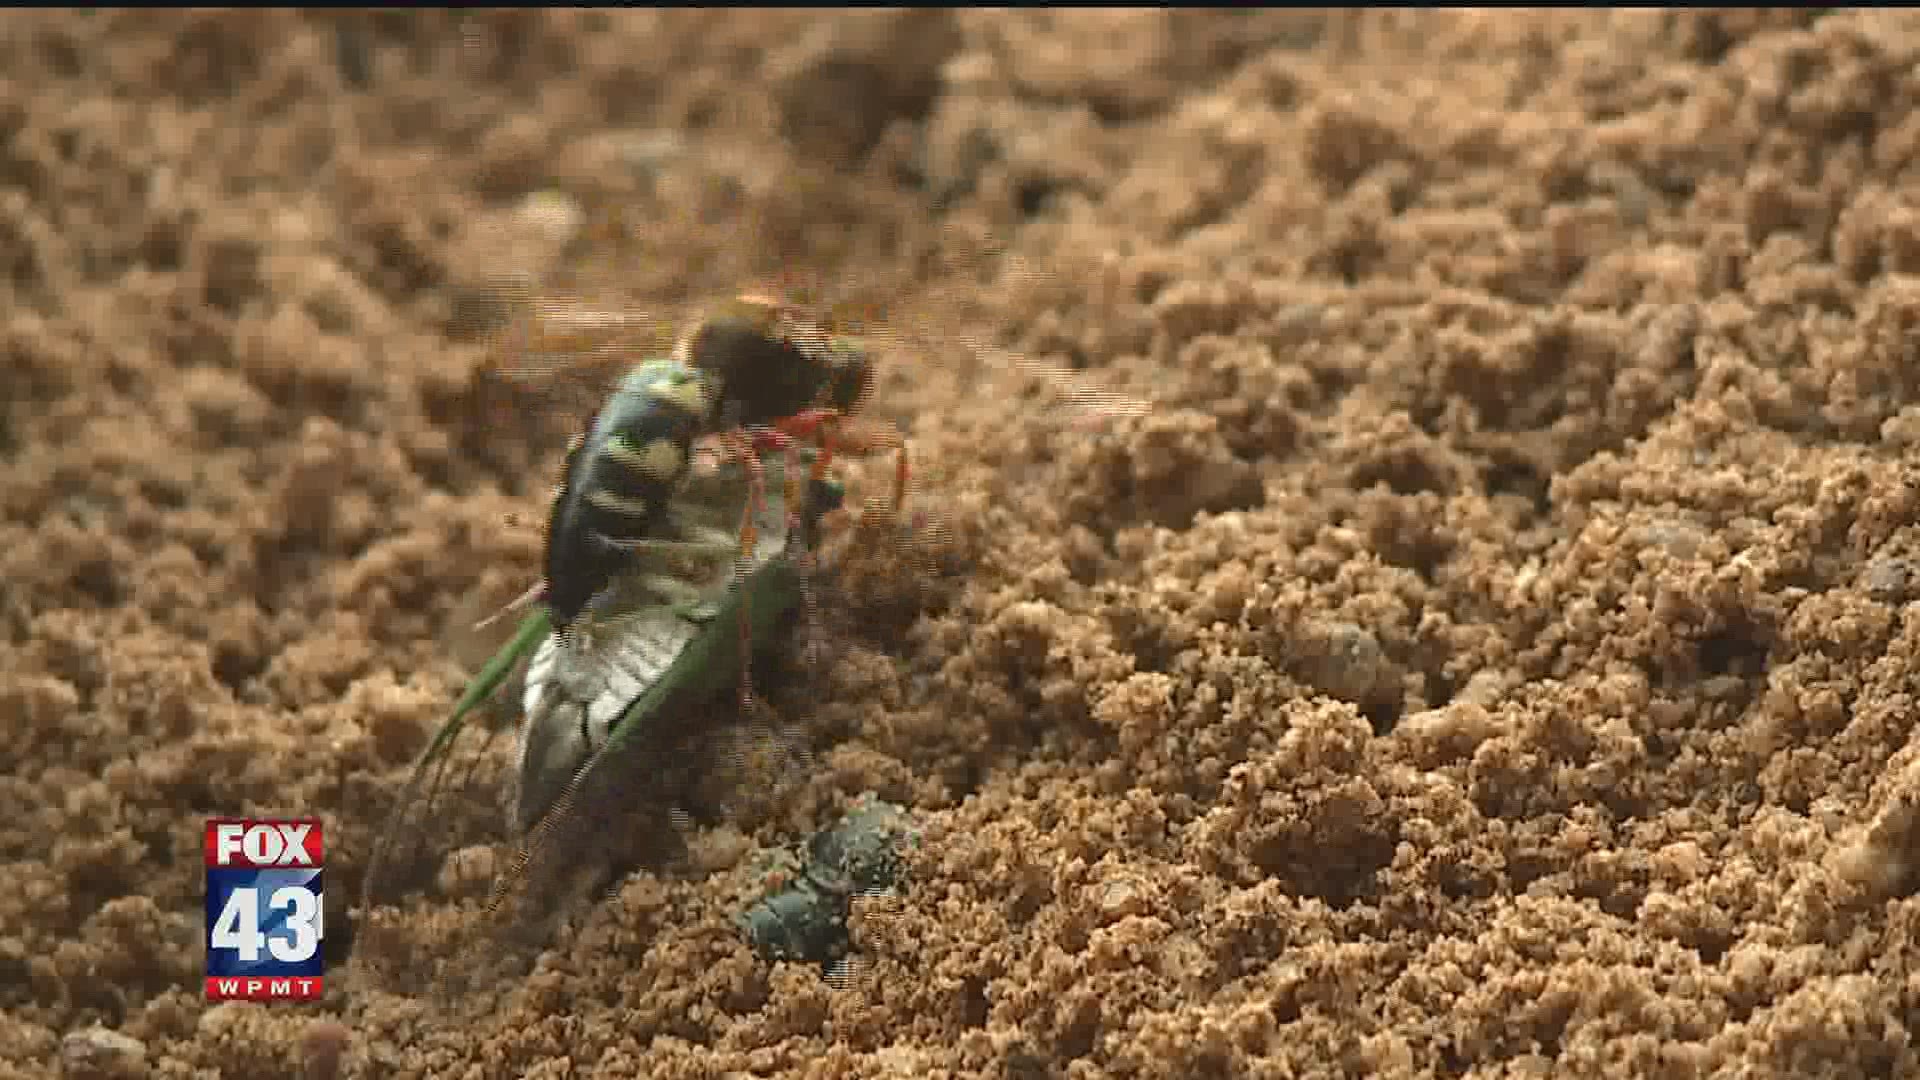 'The BugMan' Ryan Bridge, says the cicada killer wasp is being confused for a much scarier insect